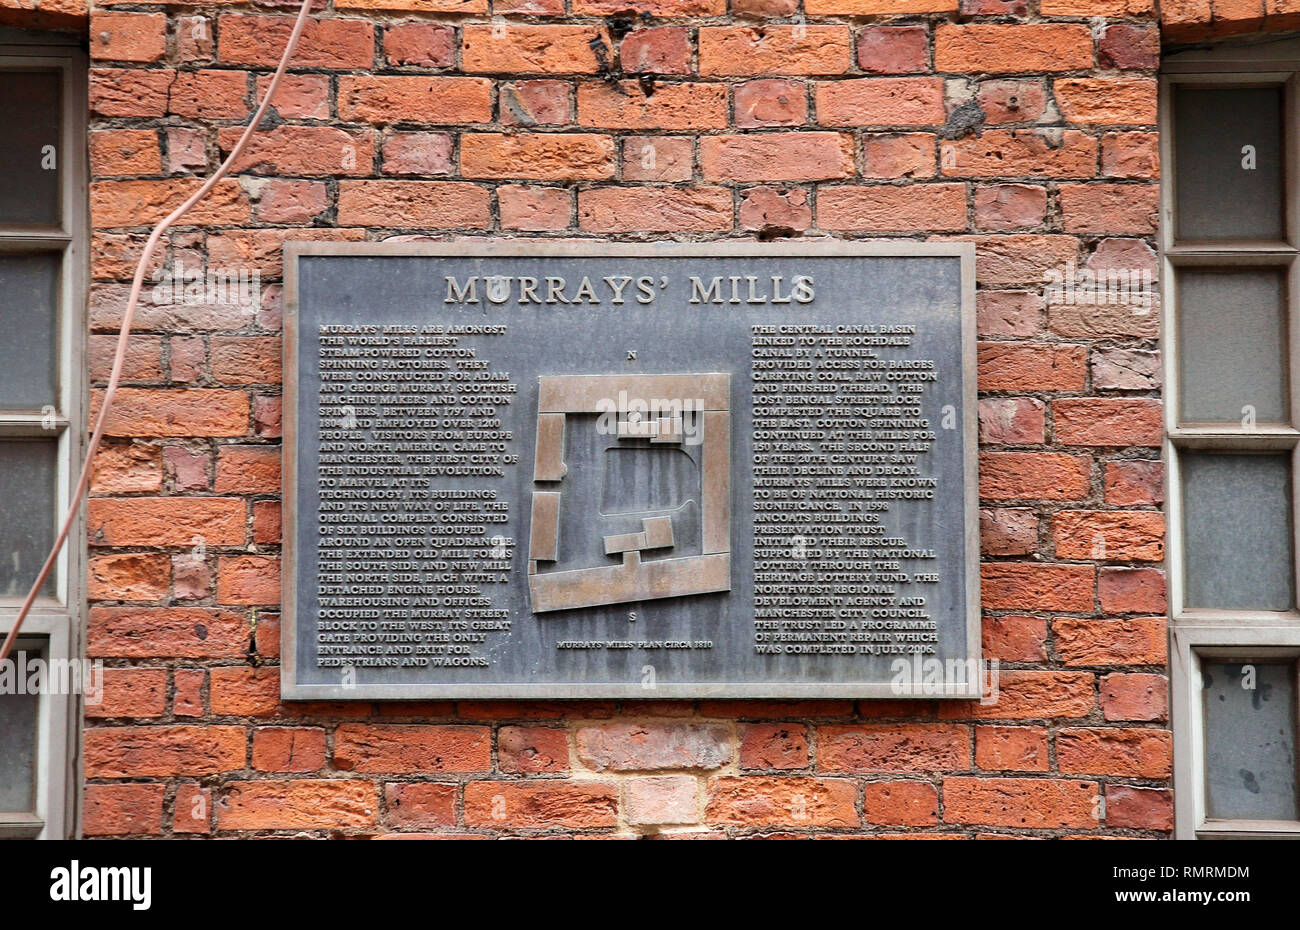 Murrays Mills plaque at Ancoats in Manchester Stock Photo